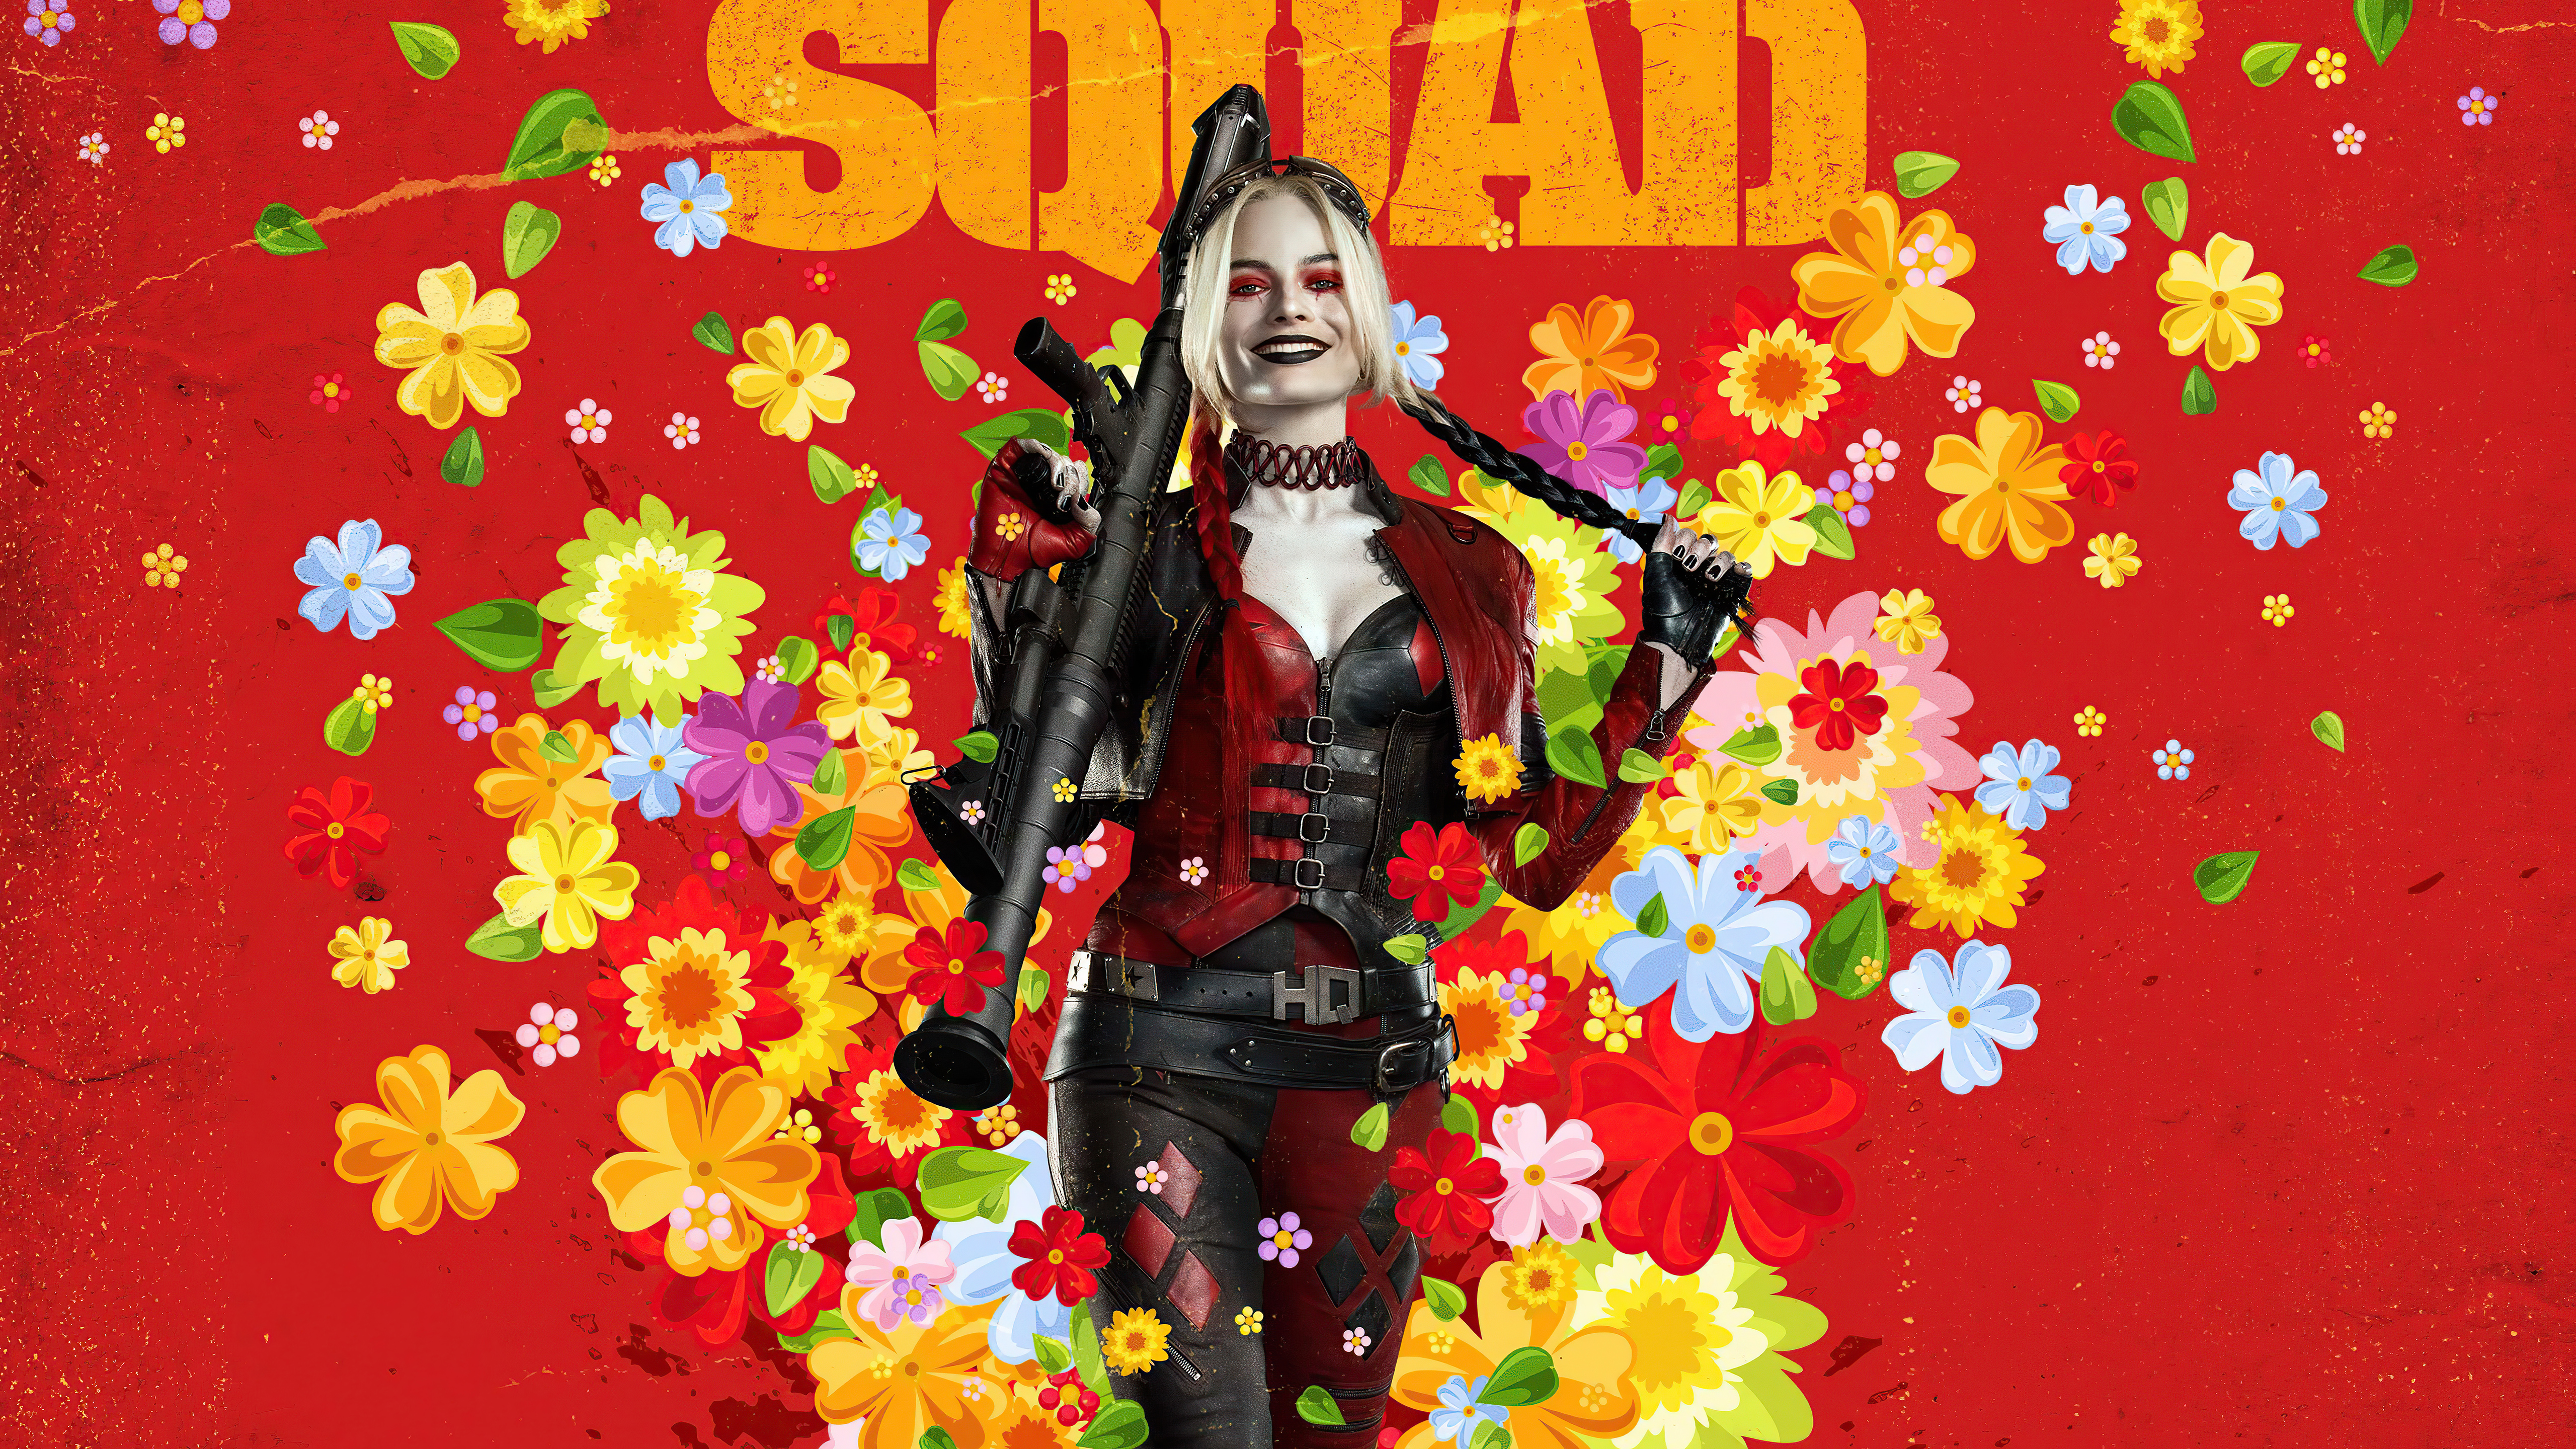 The Suicide Squad 4k Ultra HD Wallpaper